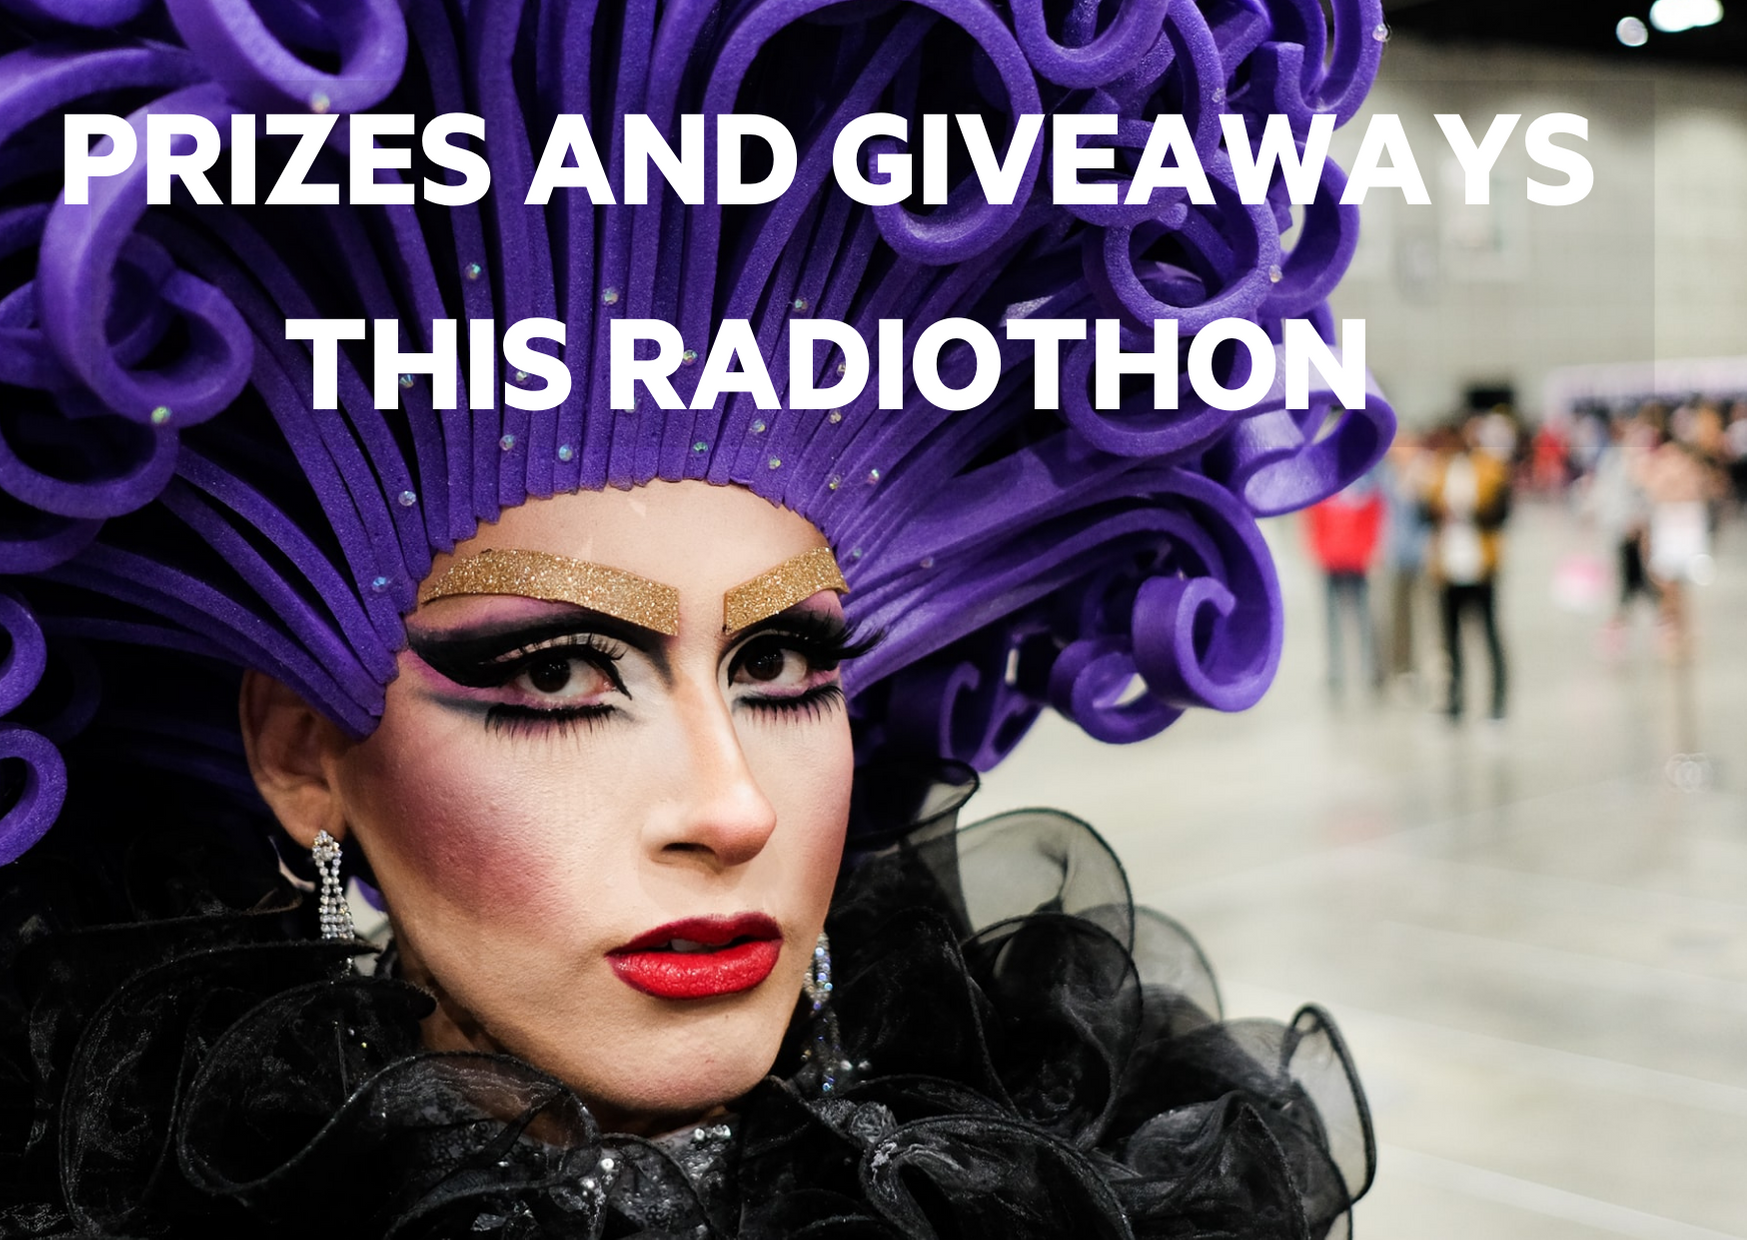 Win BIG this Radiothon with Daily Prizes and Giveaways!